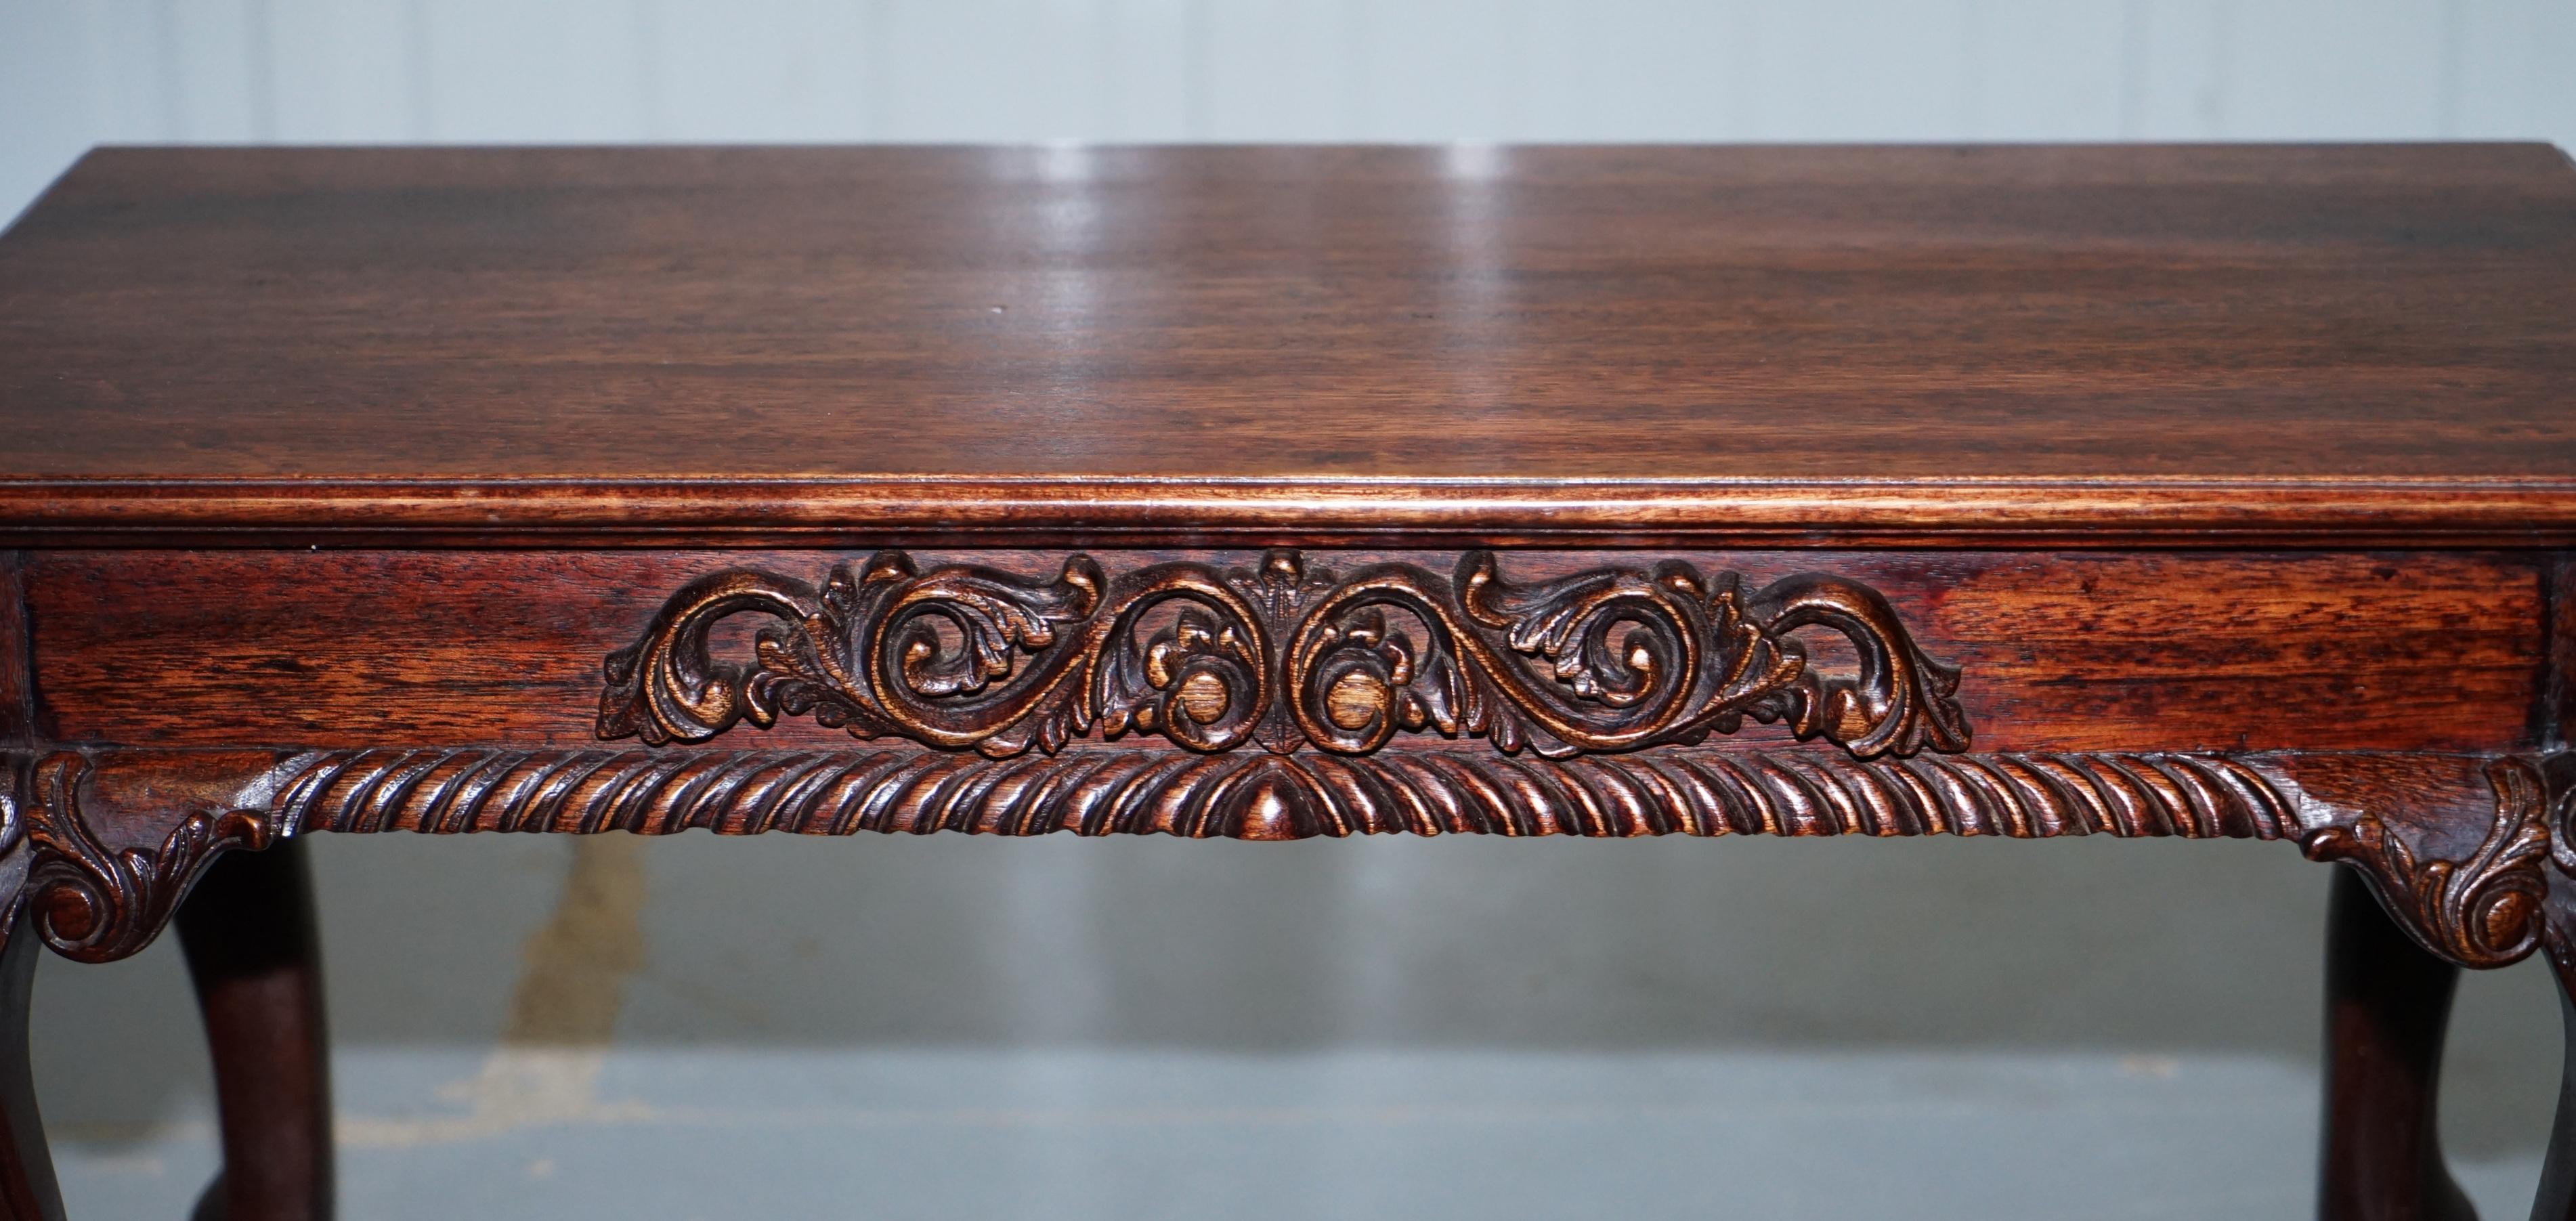 English Nice Small Vintage Carved Hardwood Coffee Table with Irish Acanthus Leaf Details